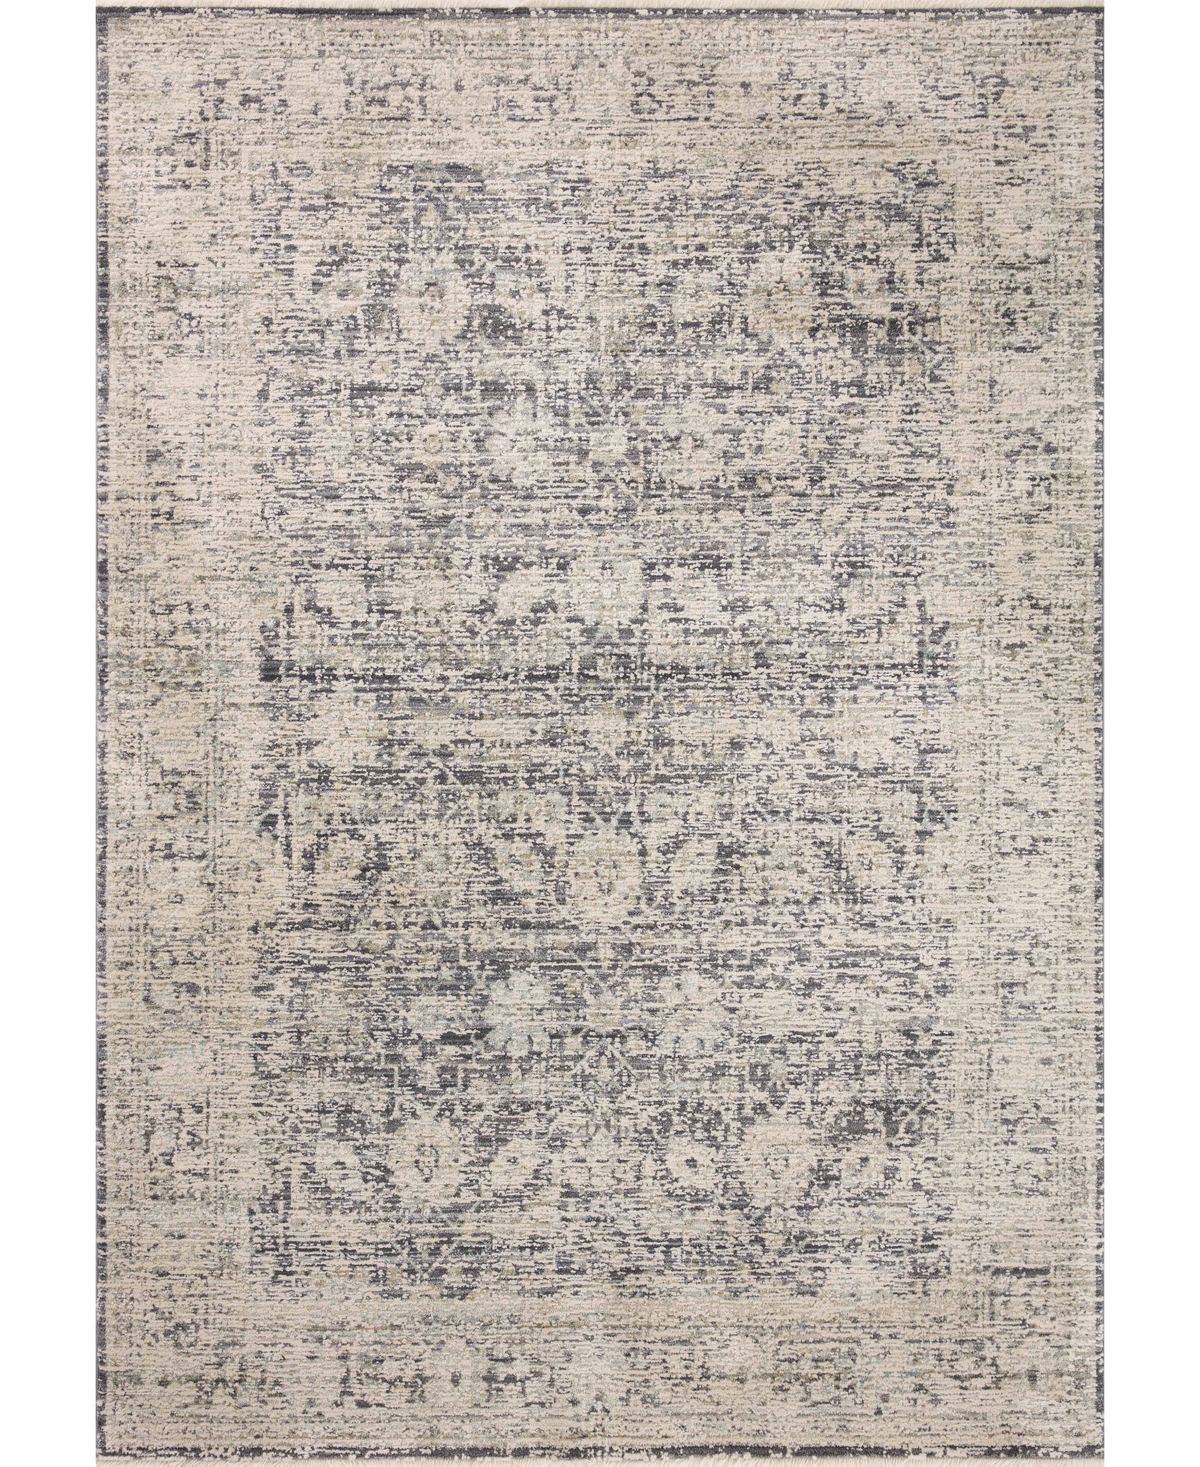 Amber Lewis X Loloi Alie Ale-05 5'3" X 7'9" Area Rug In Charcoal